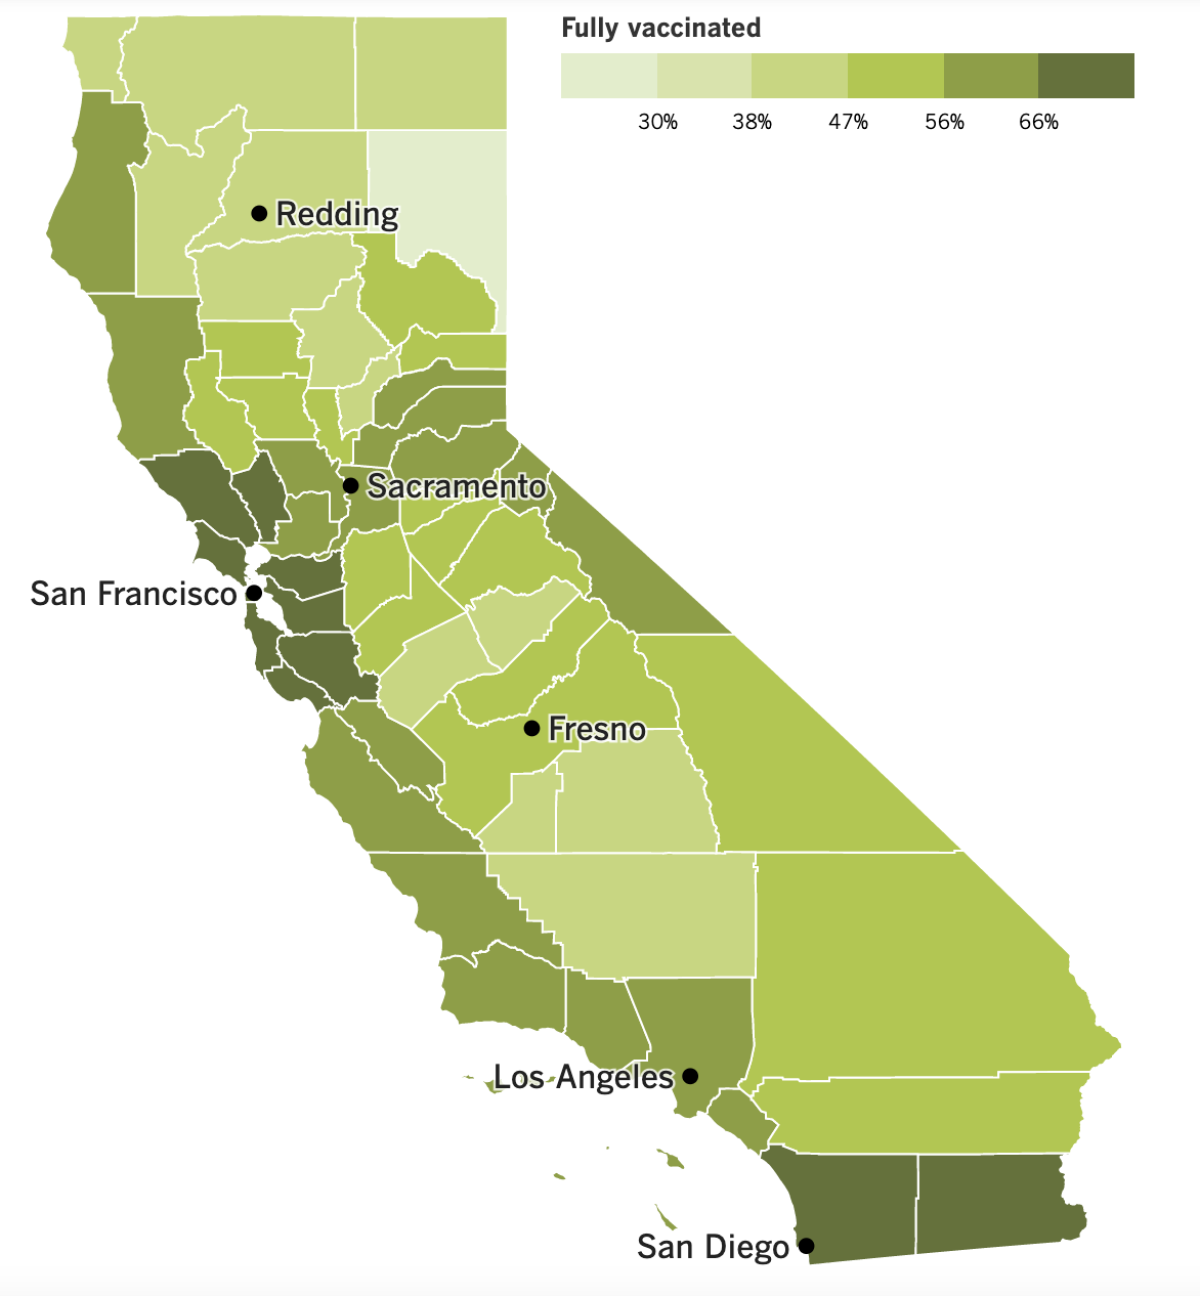 A map that shows California's COVID-19 vaccination progress by county.